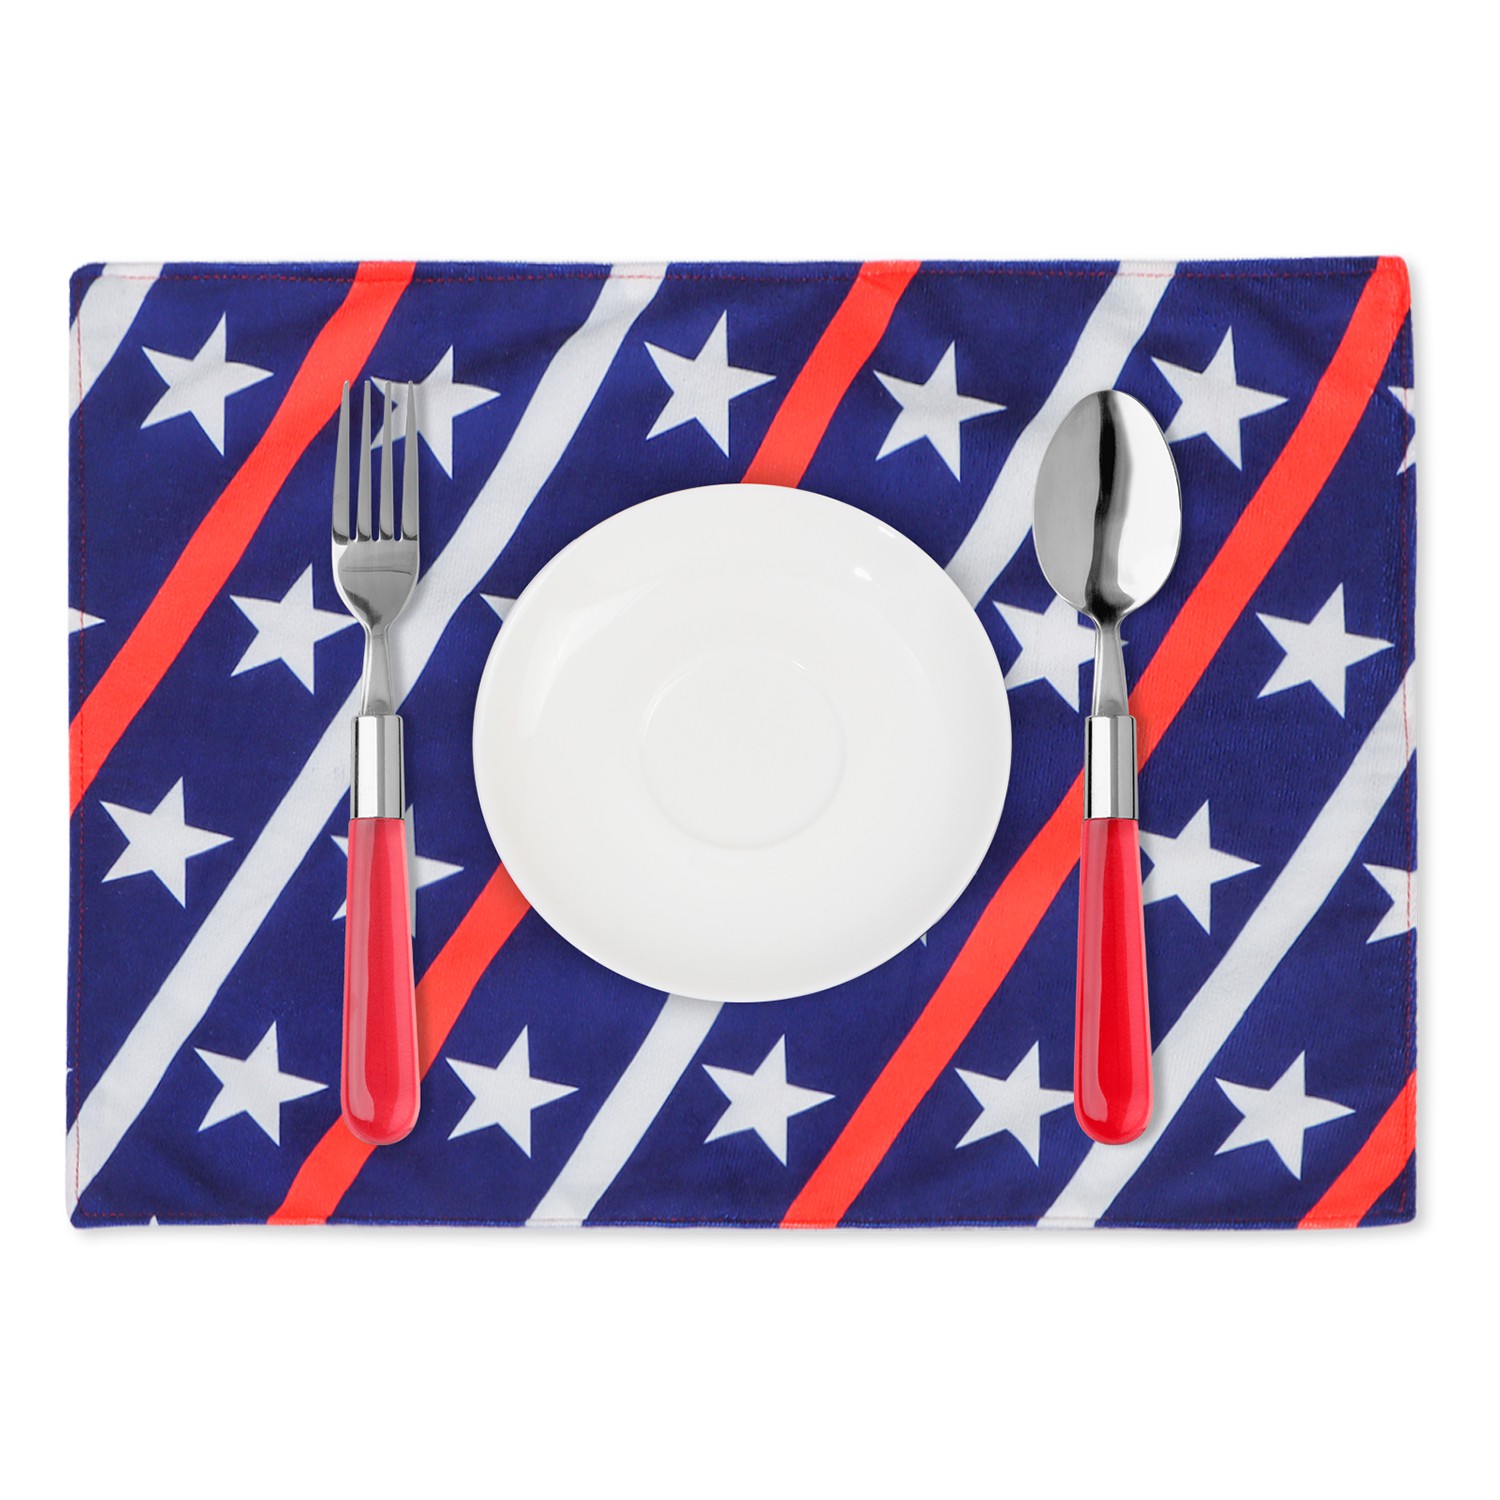 ☆YOLA☆ 4pcs/set Table Decor Independence Day Non-Slip Table Place Mats Placemats Heat-Resistant Kitchen Rectangle Washable American Flag